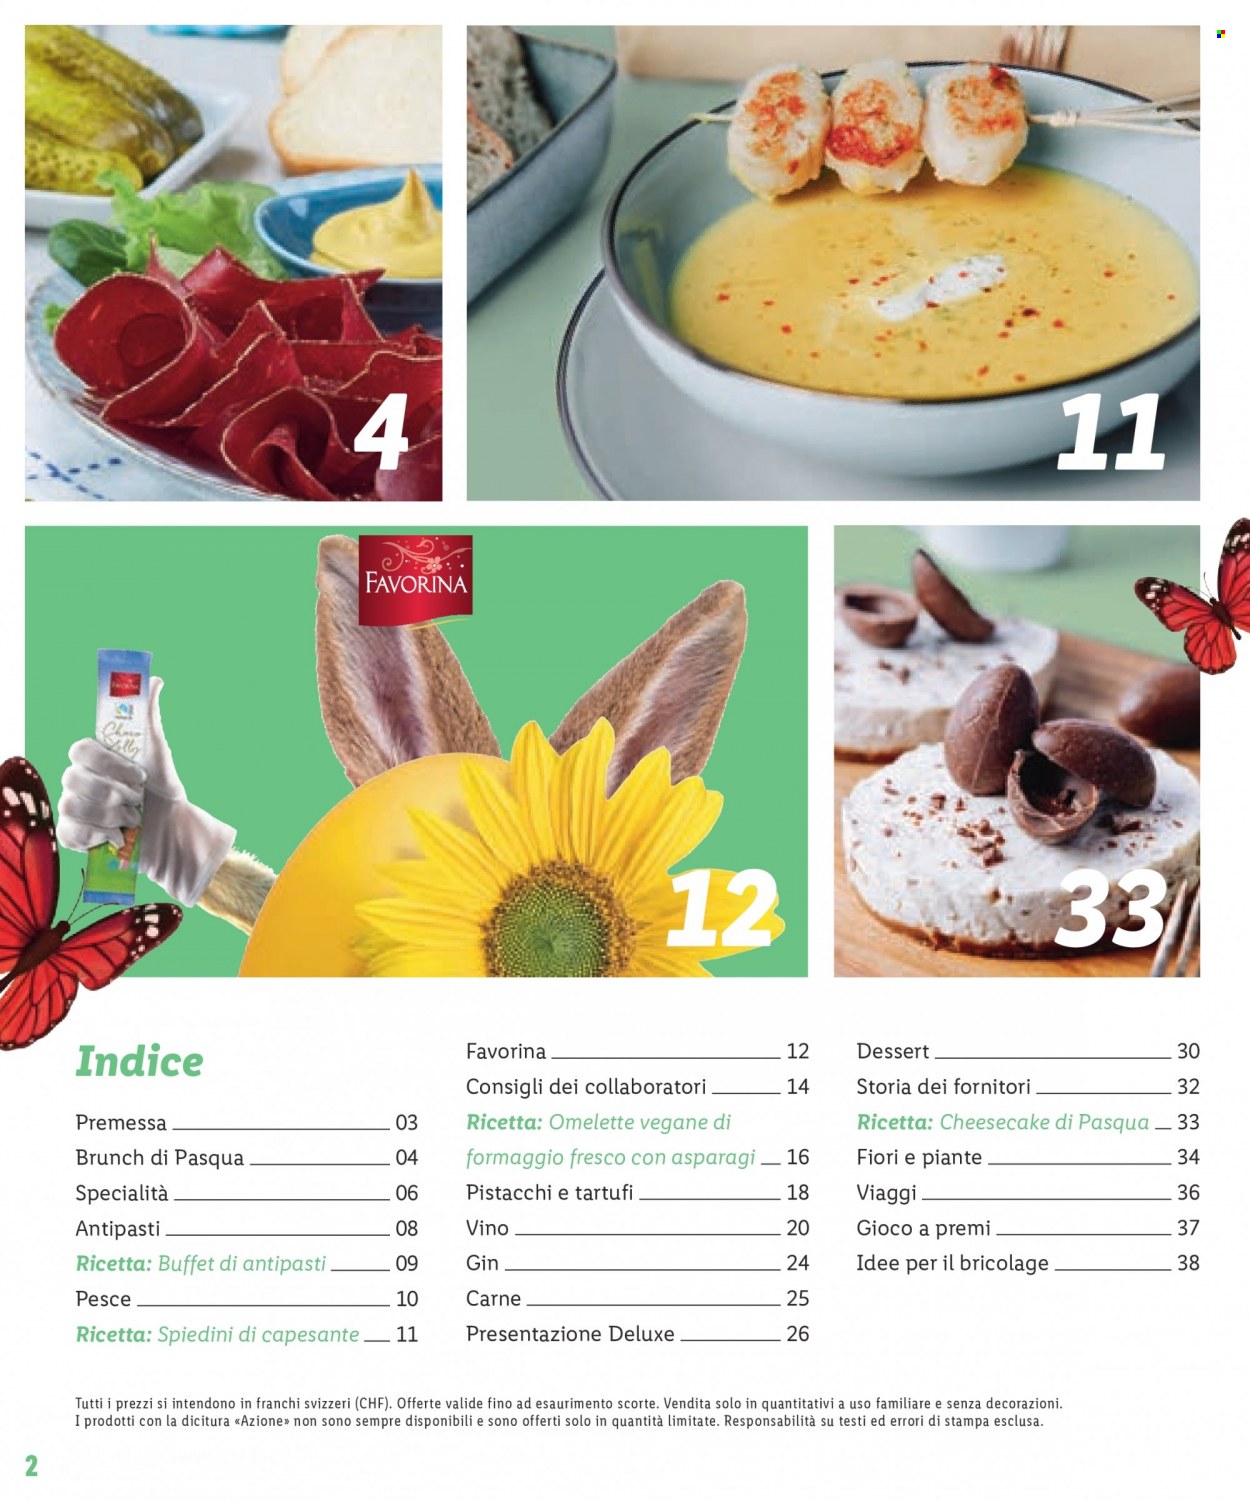 Catalogue Lidl. Page 2.